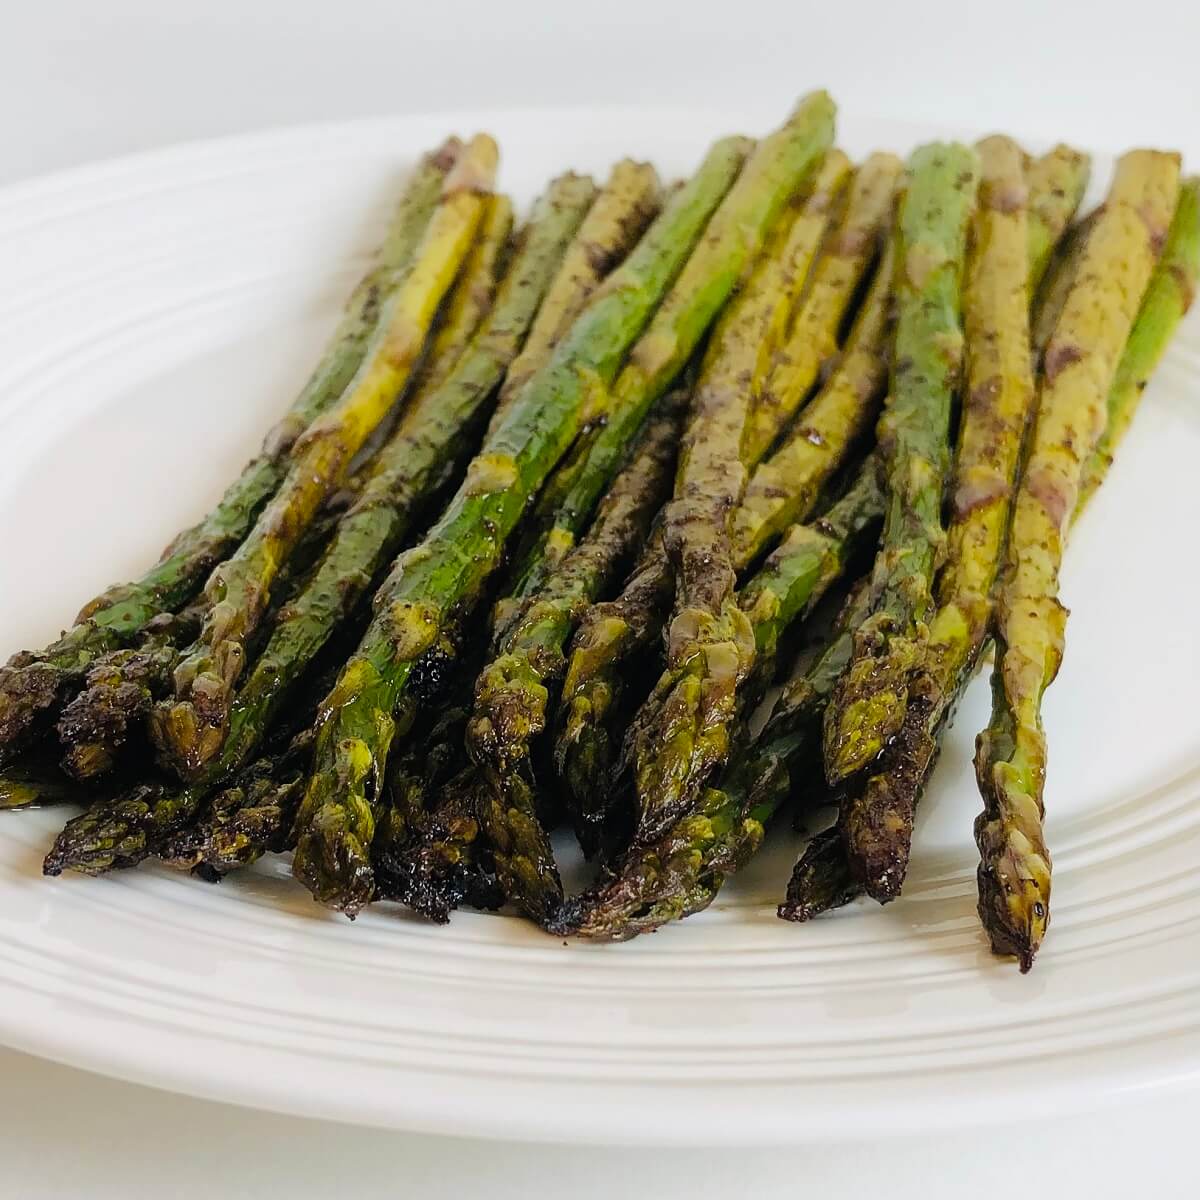 Baked asparagus spears on a white plate.